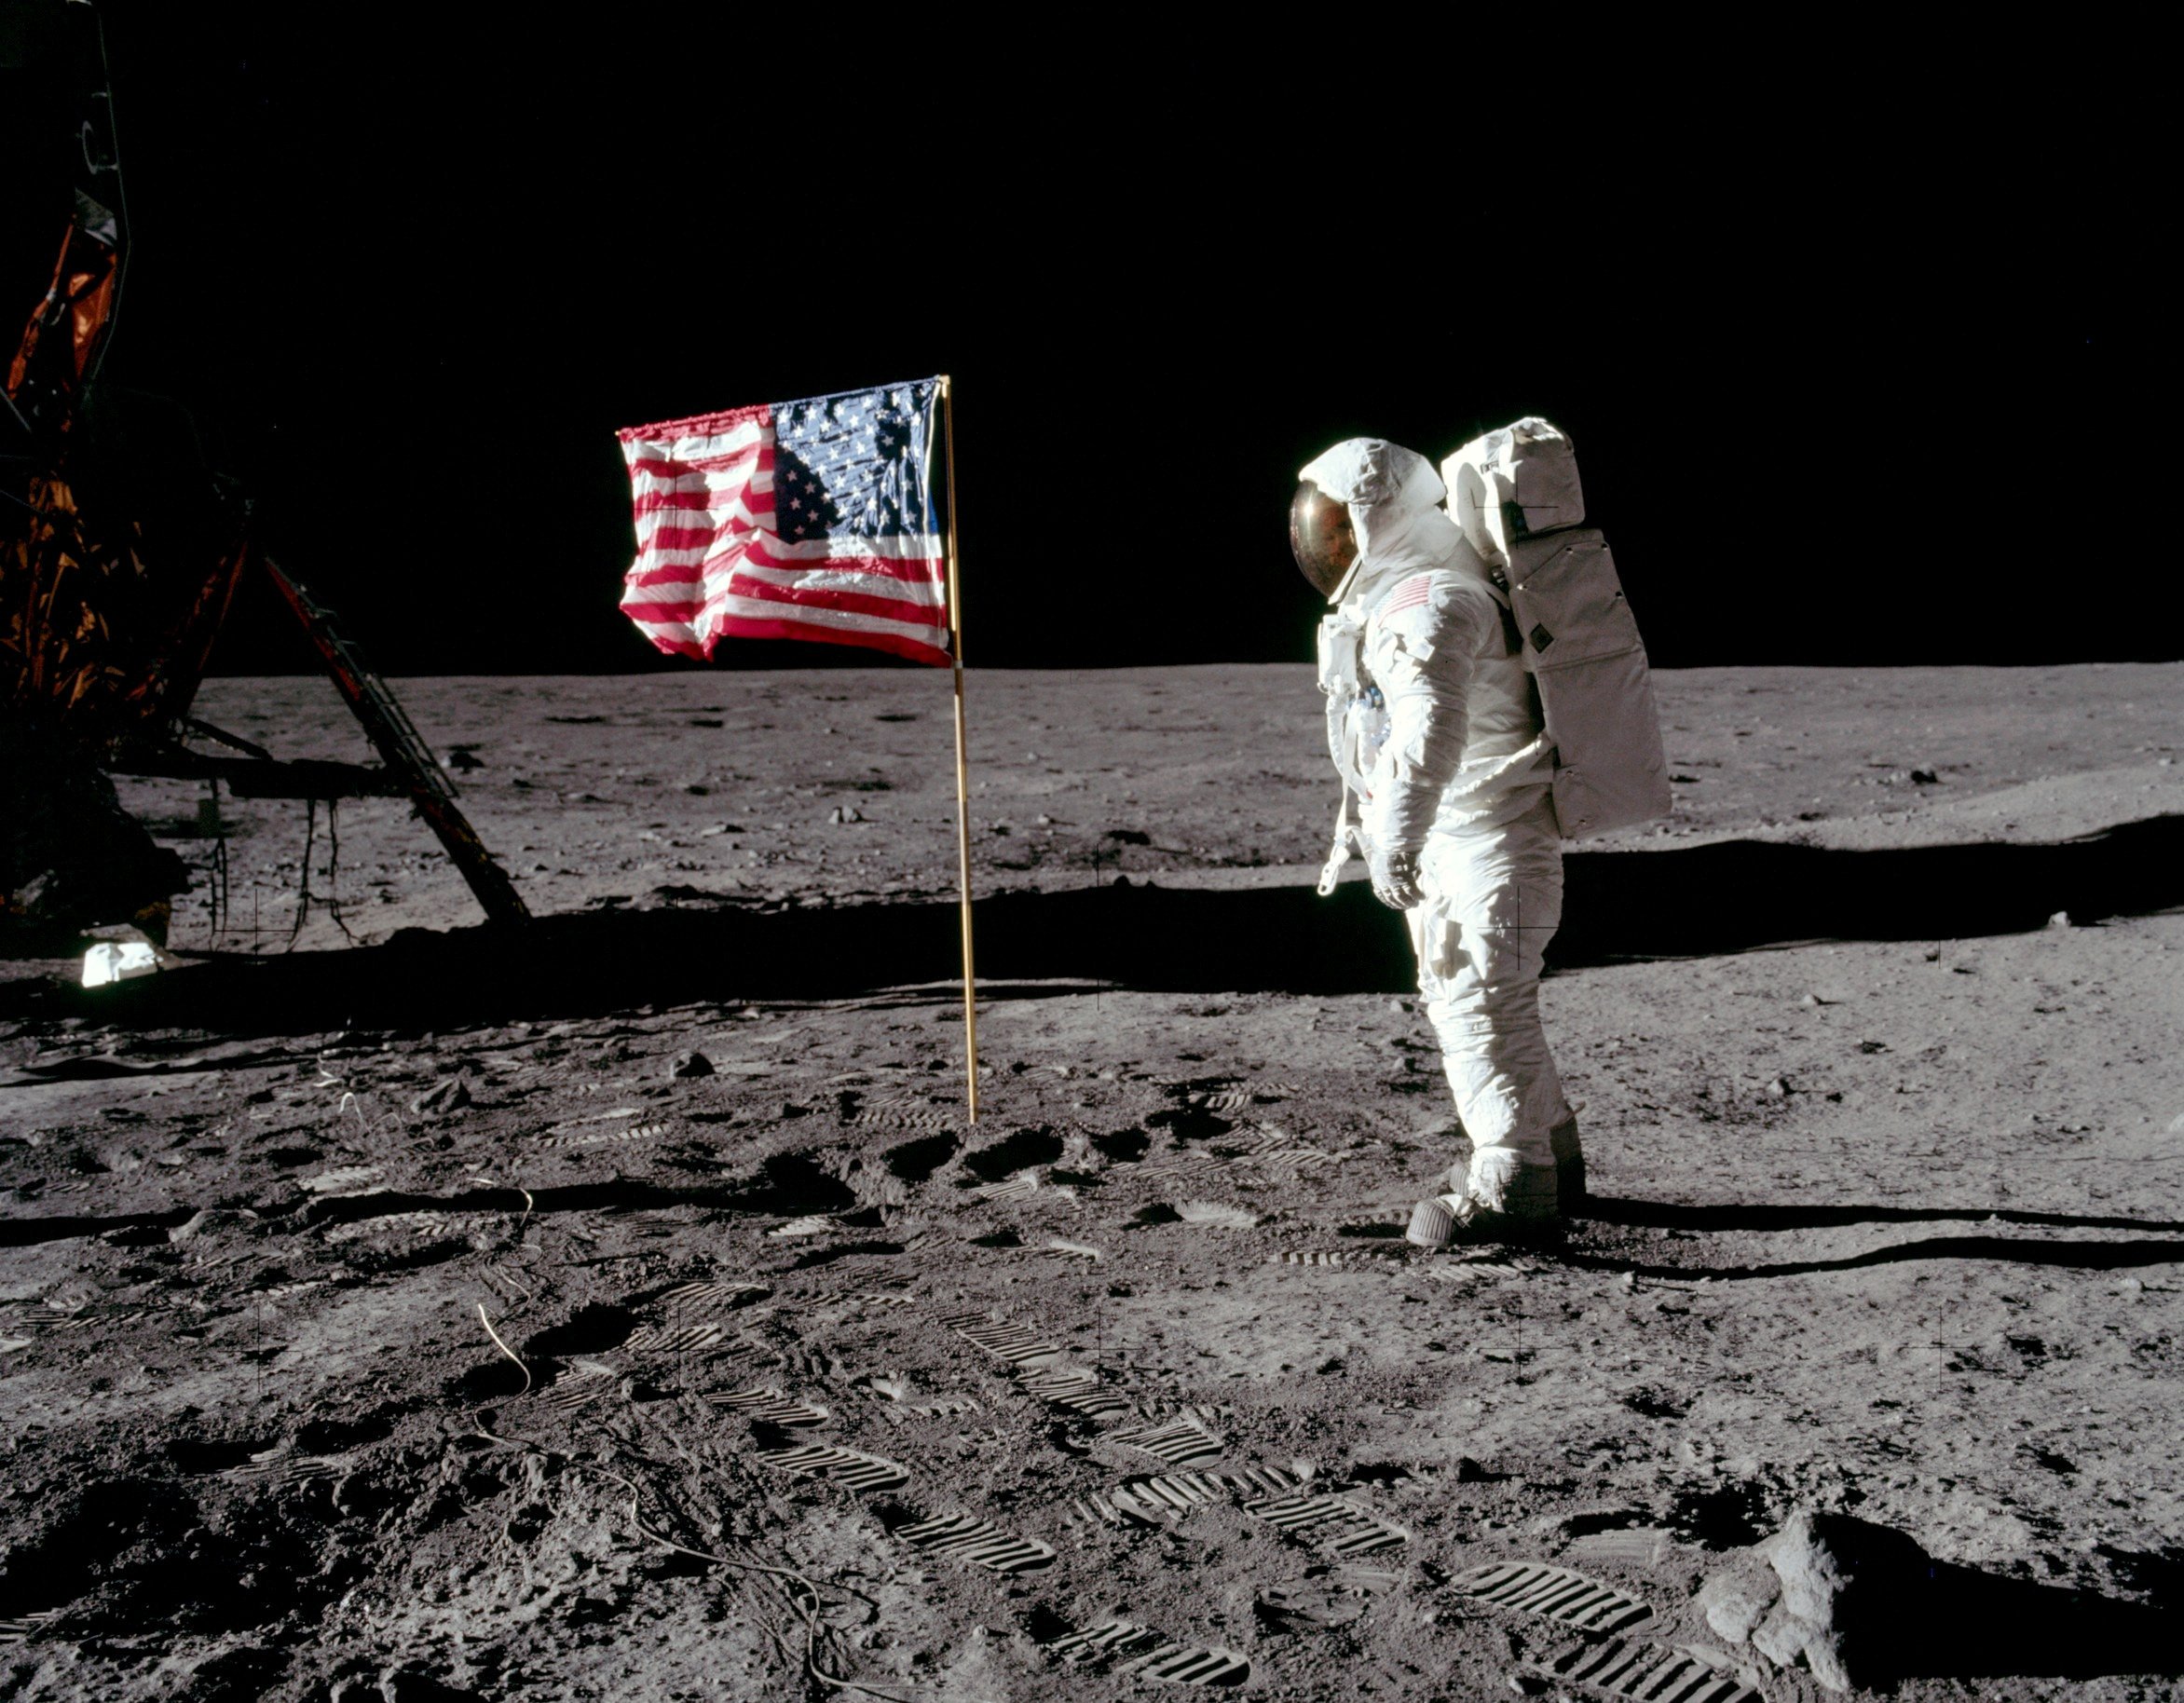 The China Association for Science and Technology has urged doubters of the 1969 moonwalk to “seek truth from facts”. Photo: Nasa/Reuters